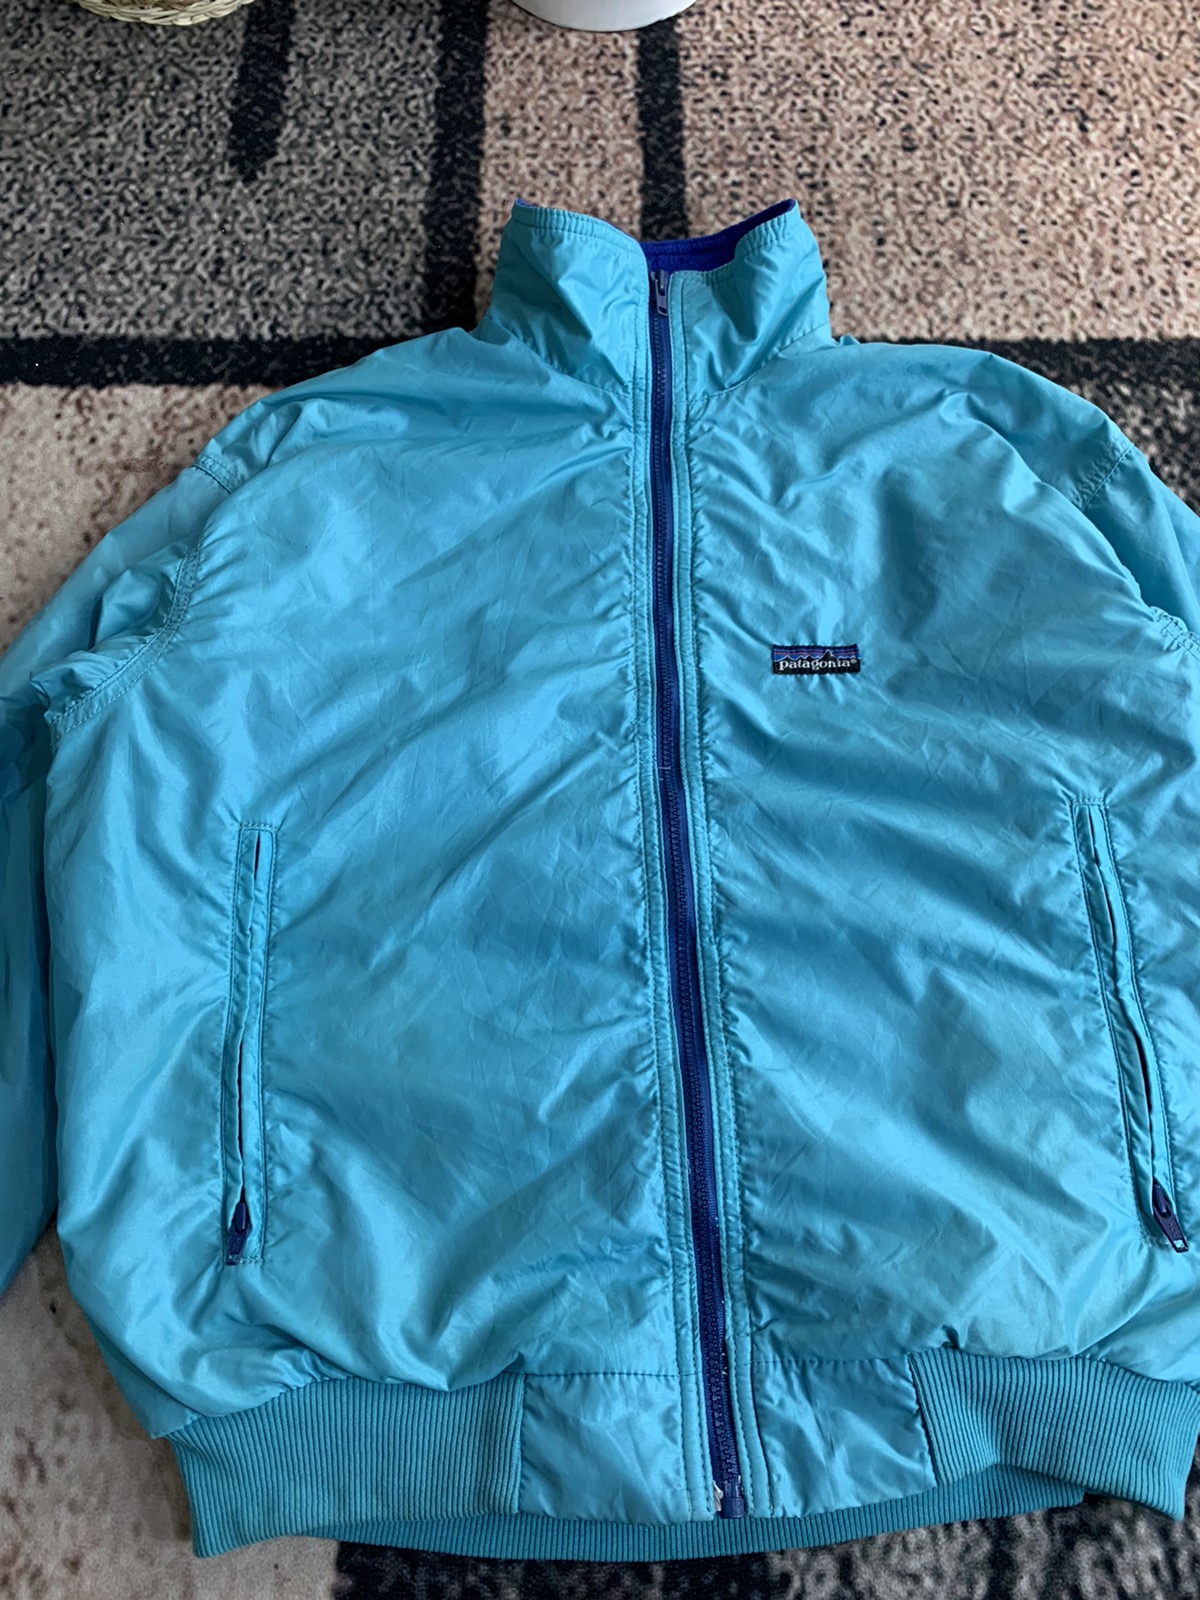 patagonia bomber jacket for 10 years old kids - 3